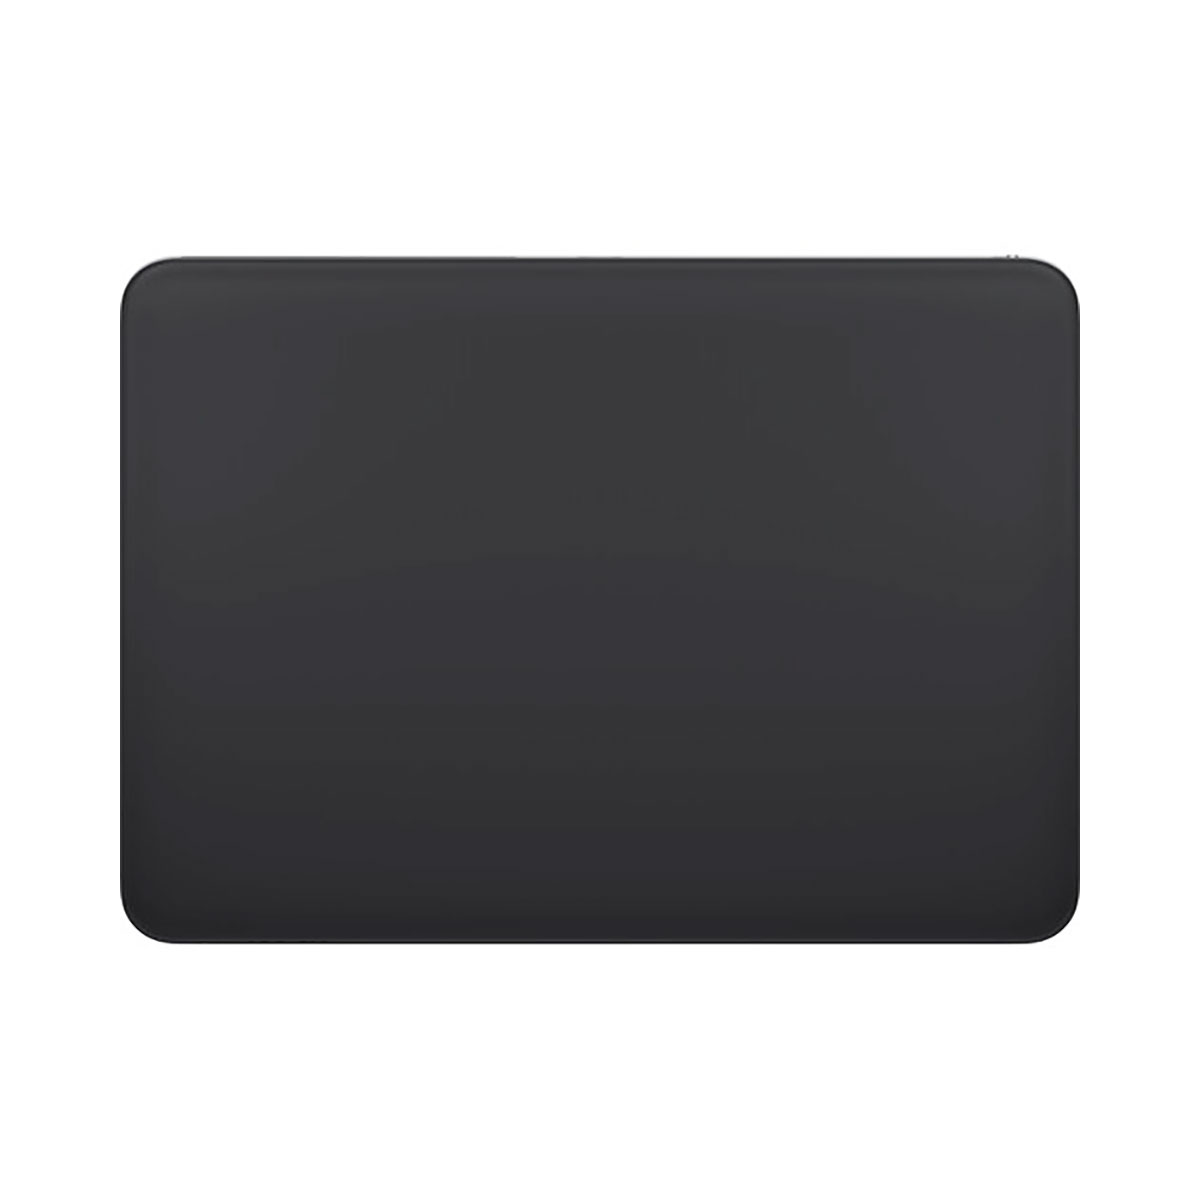 Apple - Magic Trackpad Multi-touch surface, Black